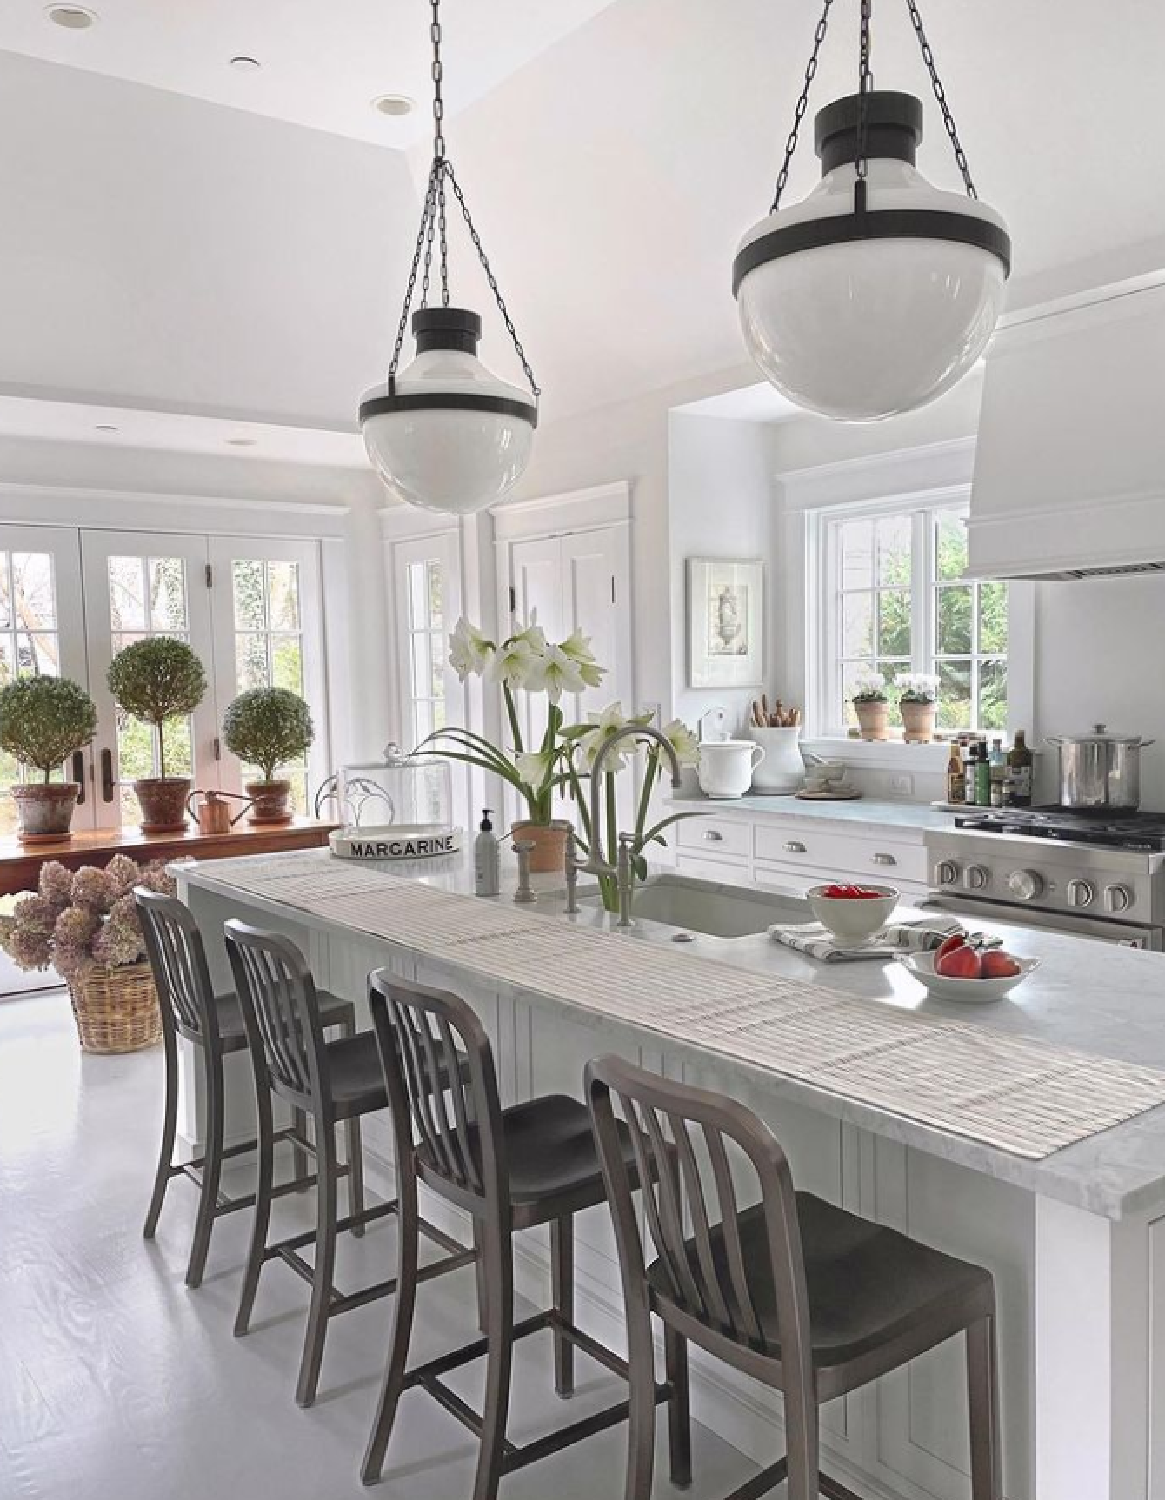 Chantilly Lace cabinets in a classic Nordic French white kitchen with light grey painted floors, topiaries near window, and classic pendants (Circa Lighting) over island - Loi of Tone on Tone. #whitekitchens #toneontone #bmshoreline #bmchantillylace